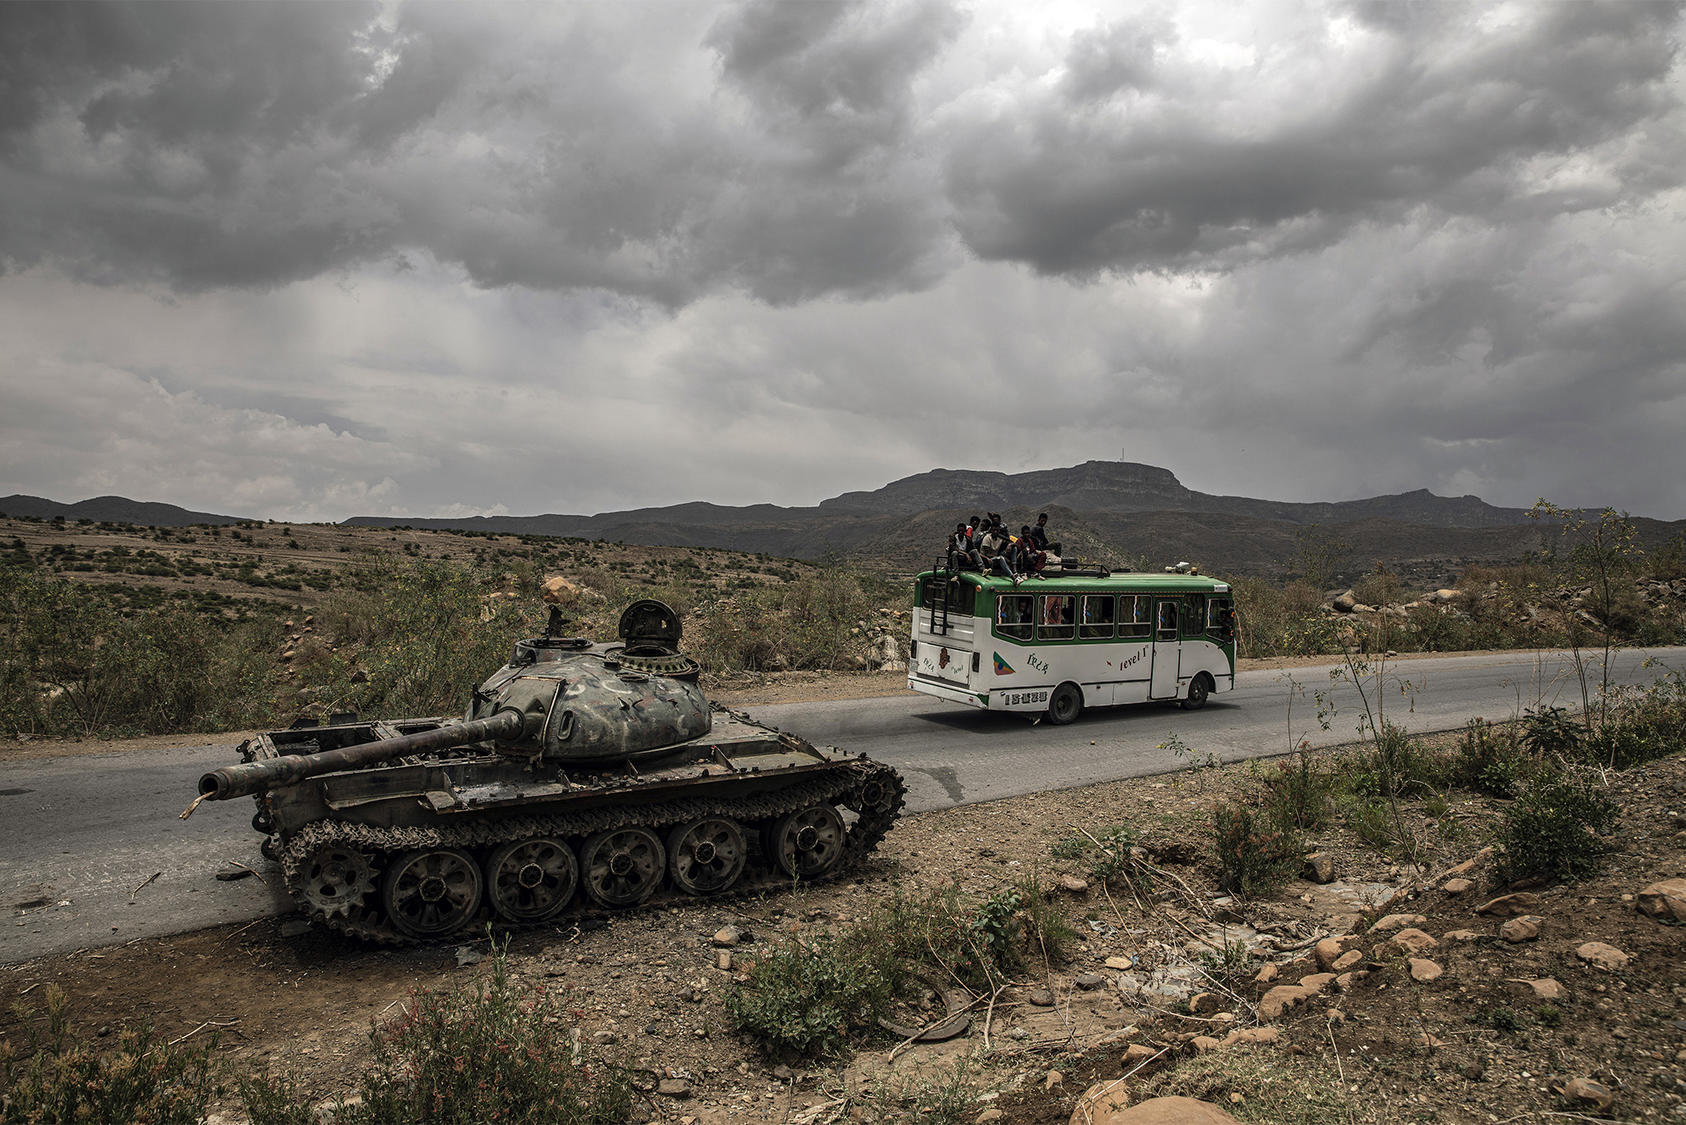 Civilians ride in and on a bus past a damaged tank outside Mekelle in Ethiopia’s Tigray region last year. Implementing a humanitarian truce in the war will require careful steps on the ground to avoid violations. (Finbarr O'Reilly/The New York Times)